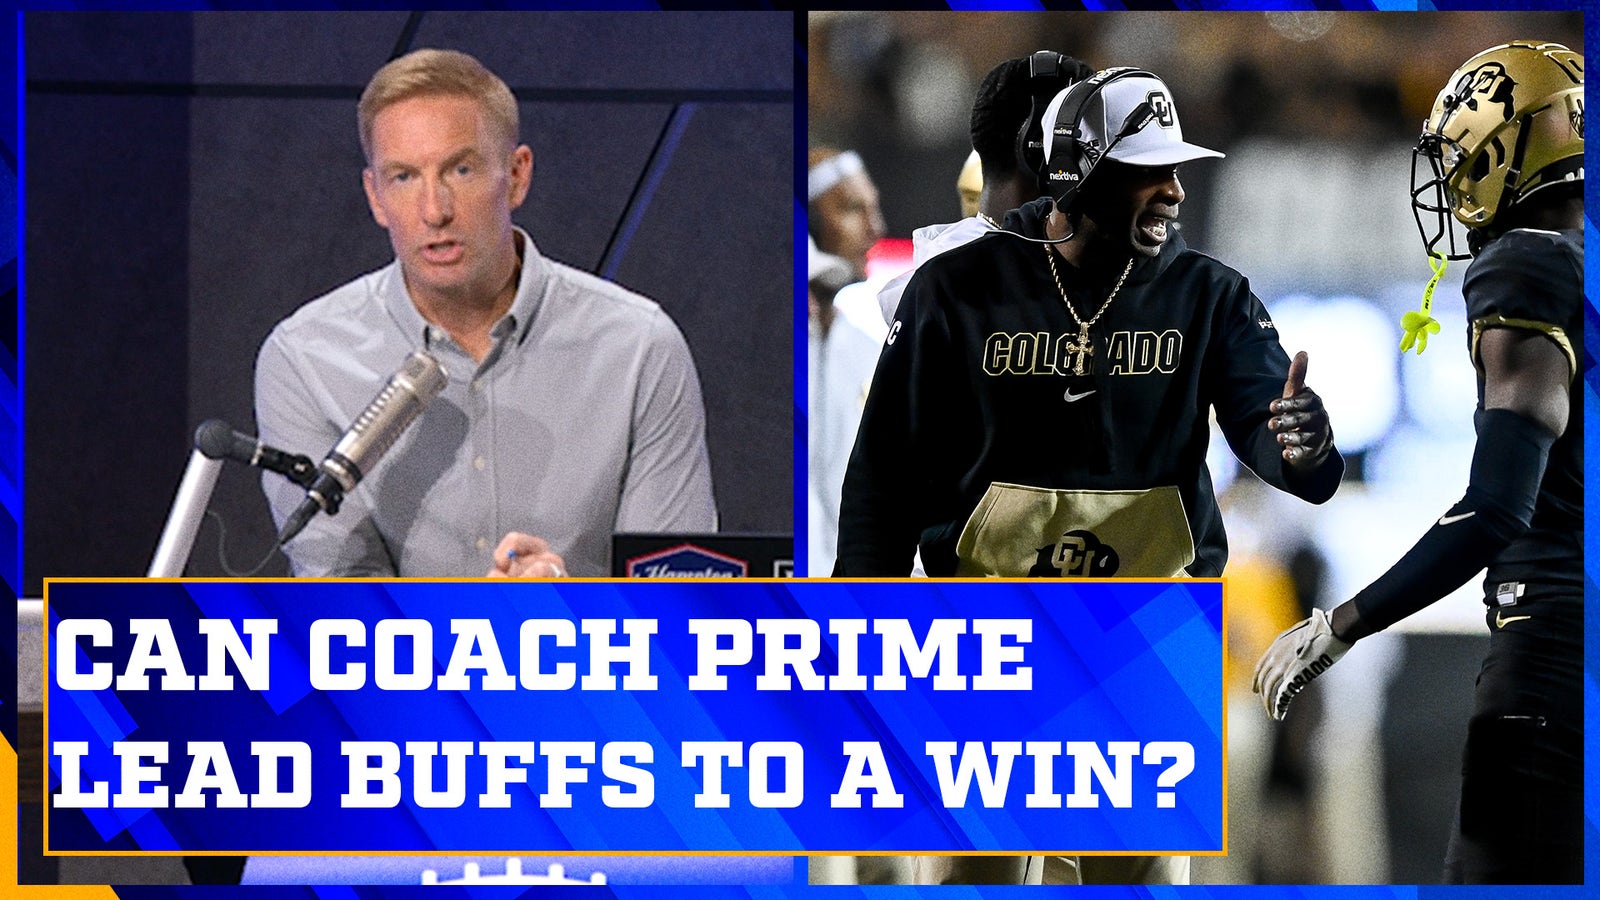 Will Coach Prime and Colorado upset Oregon on the road?